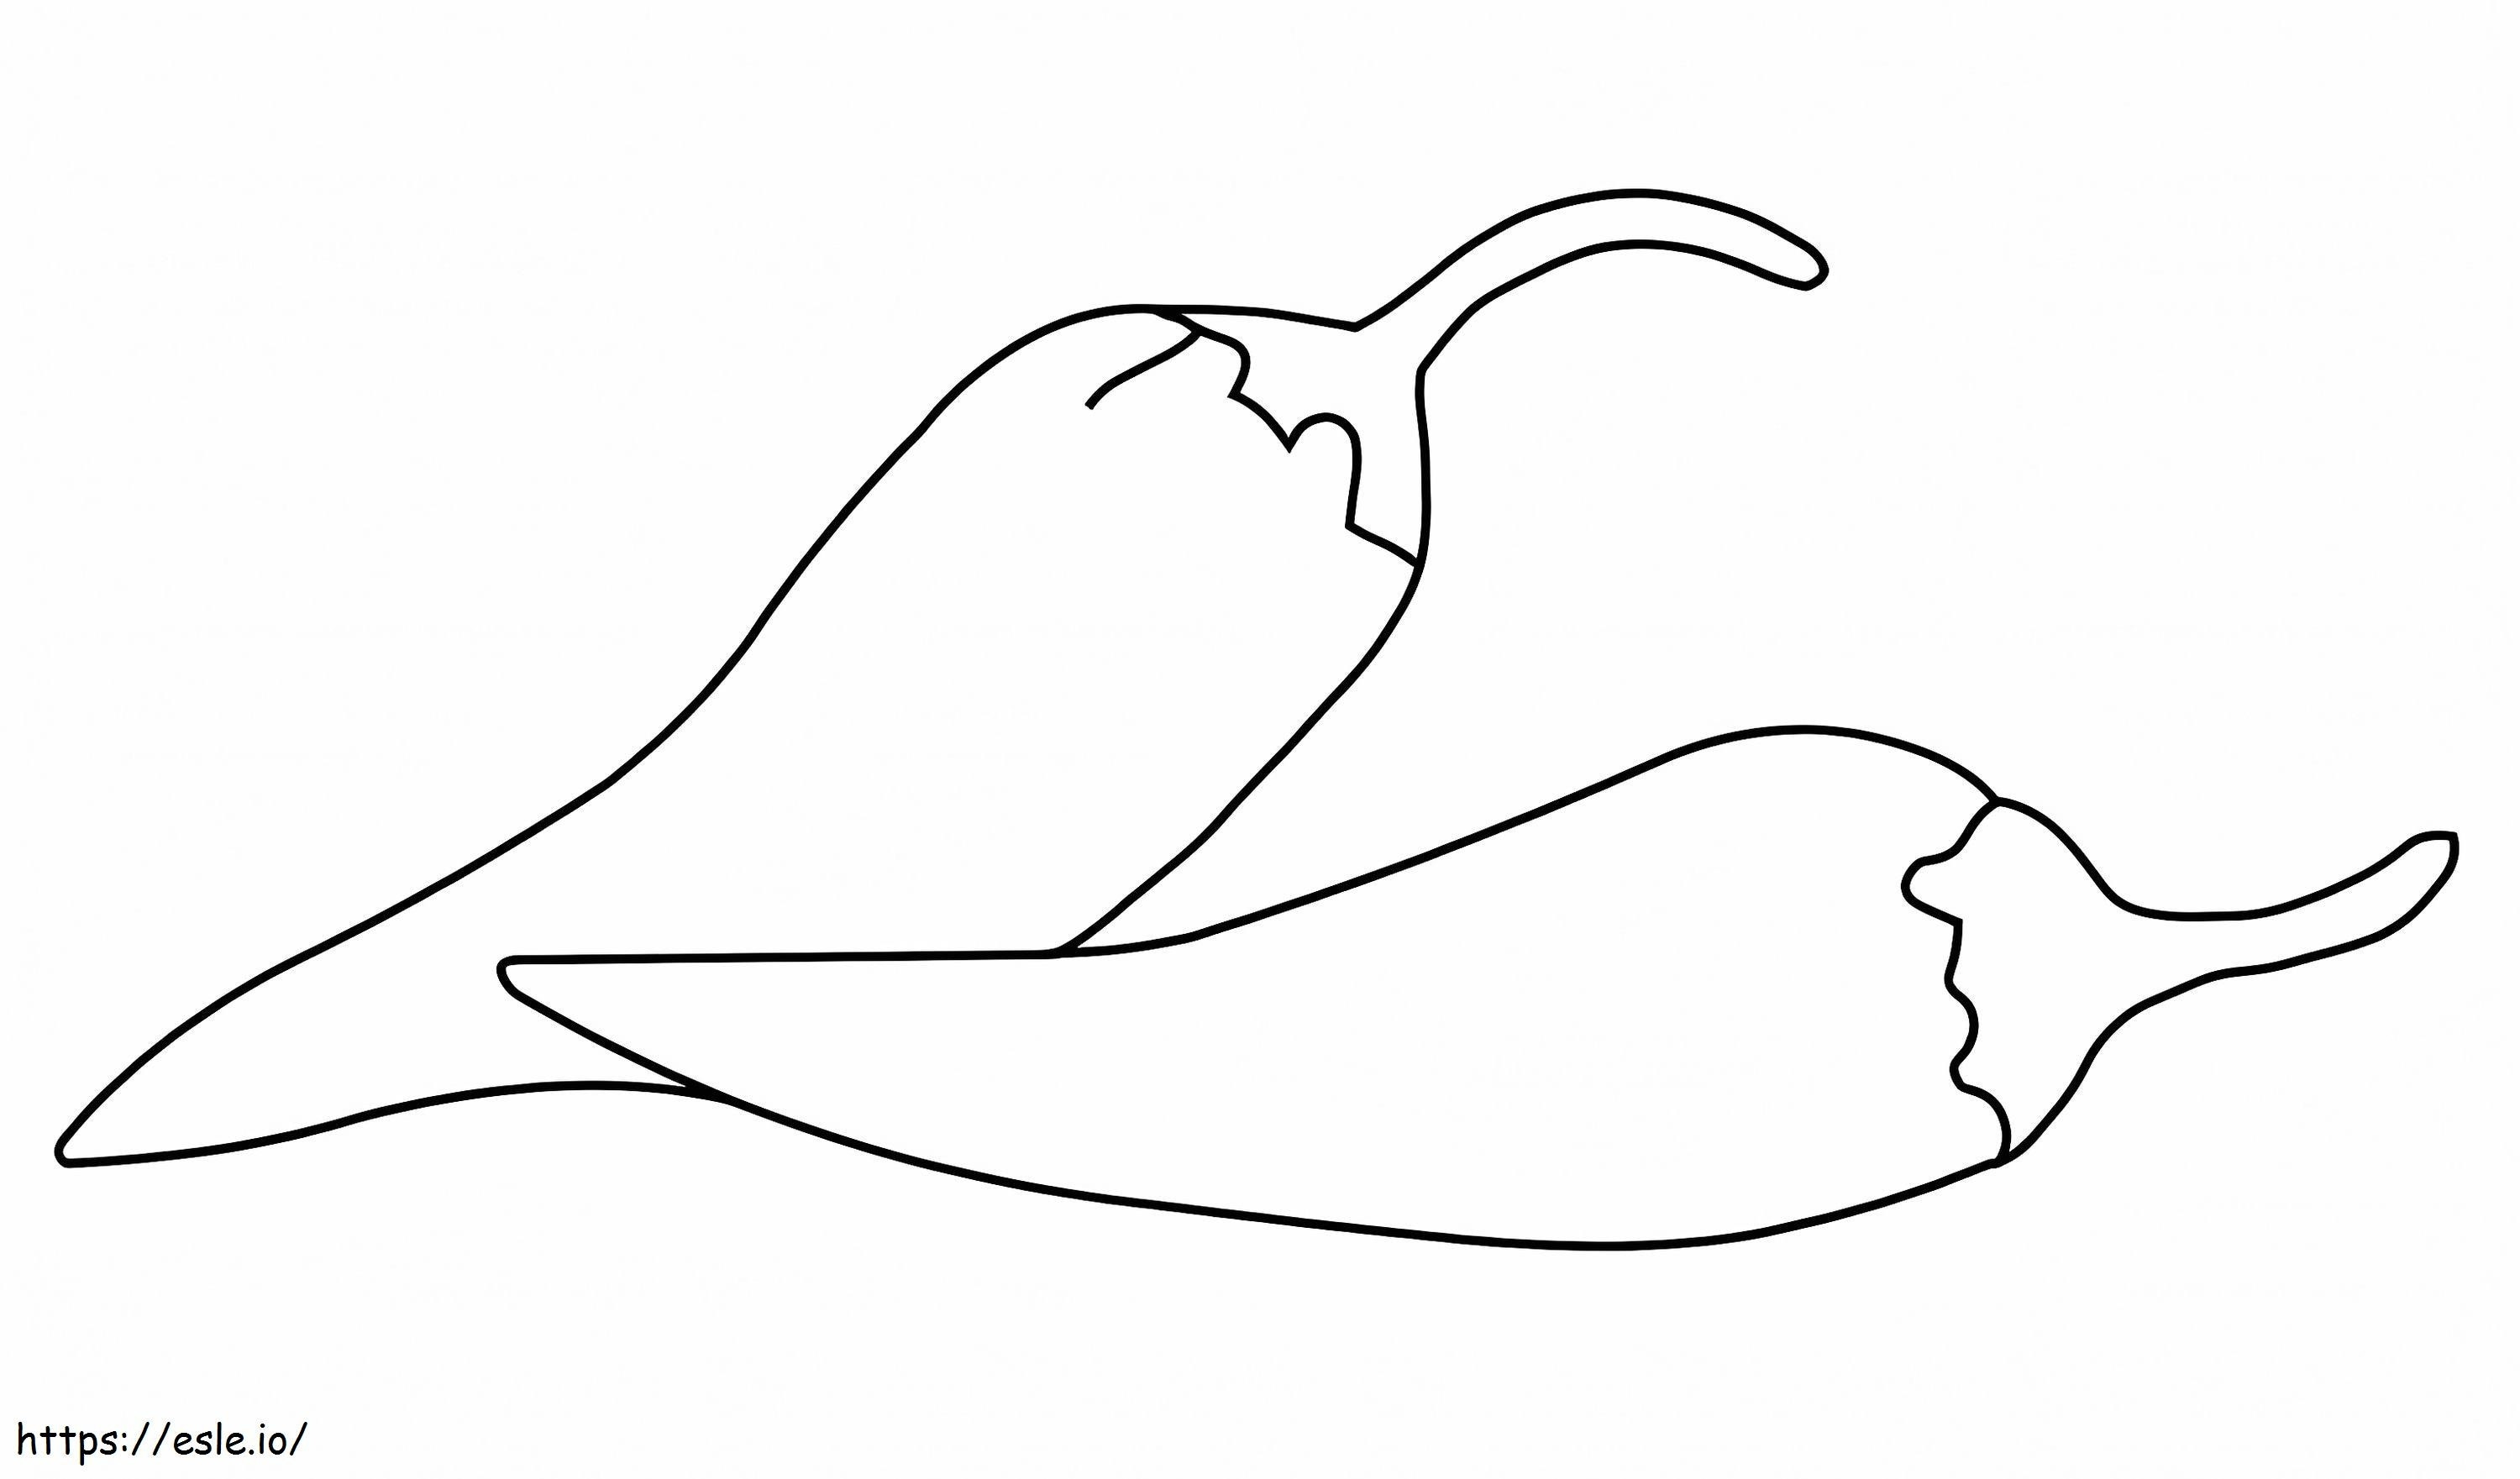 1560241218 2 Chili Peppers A4 coloring page